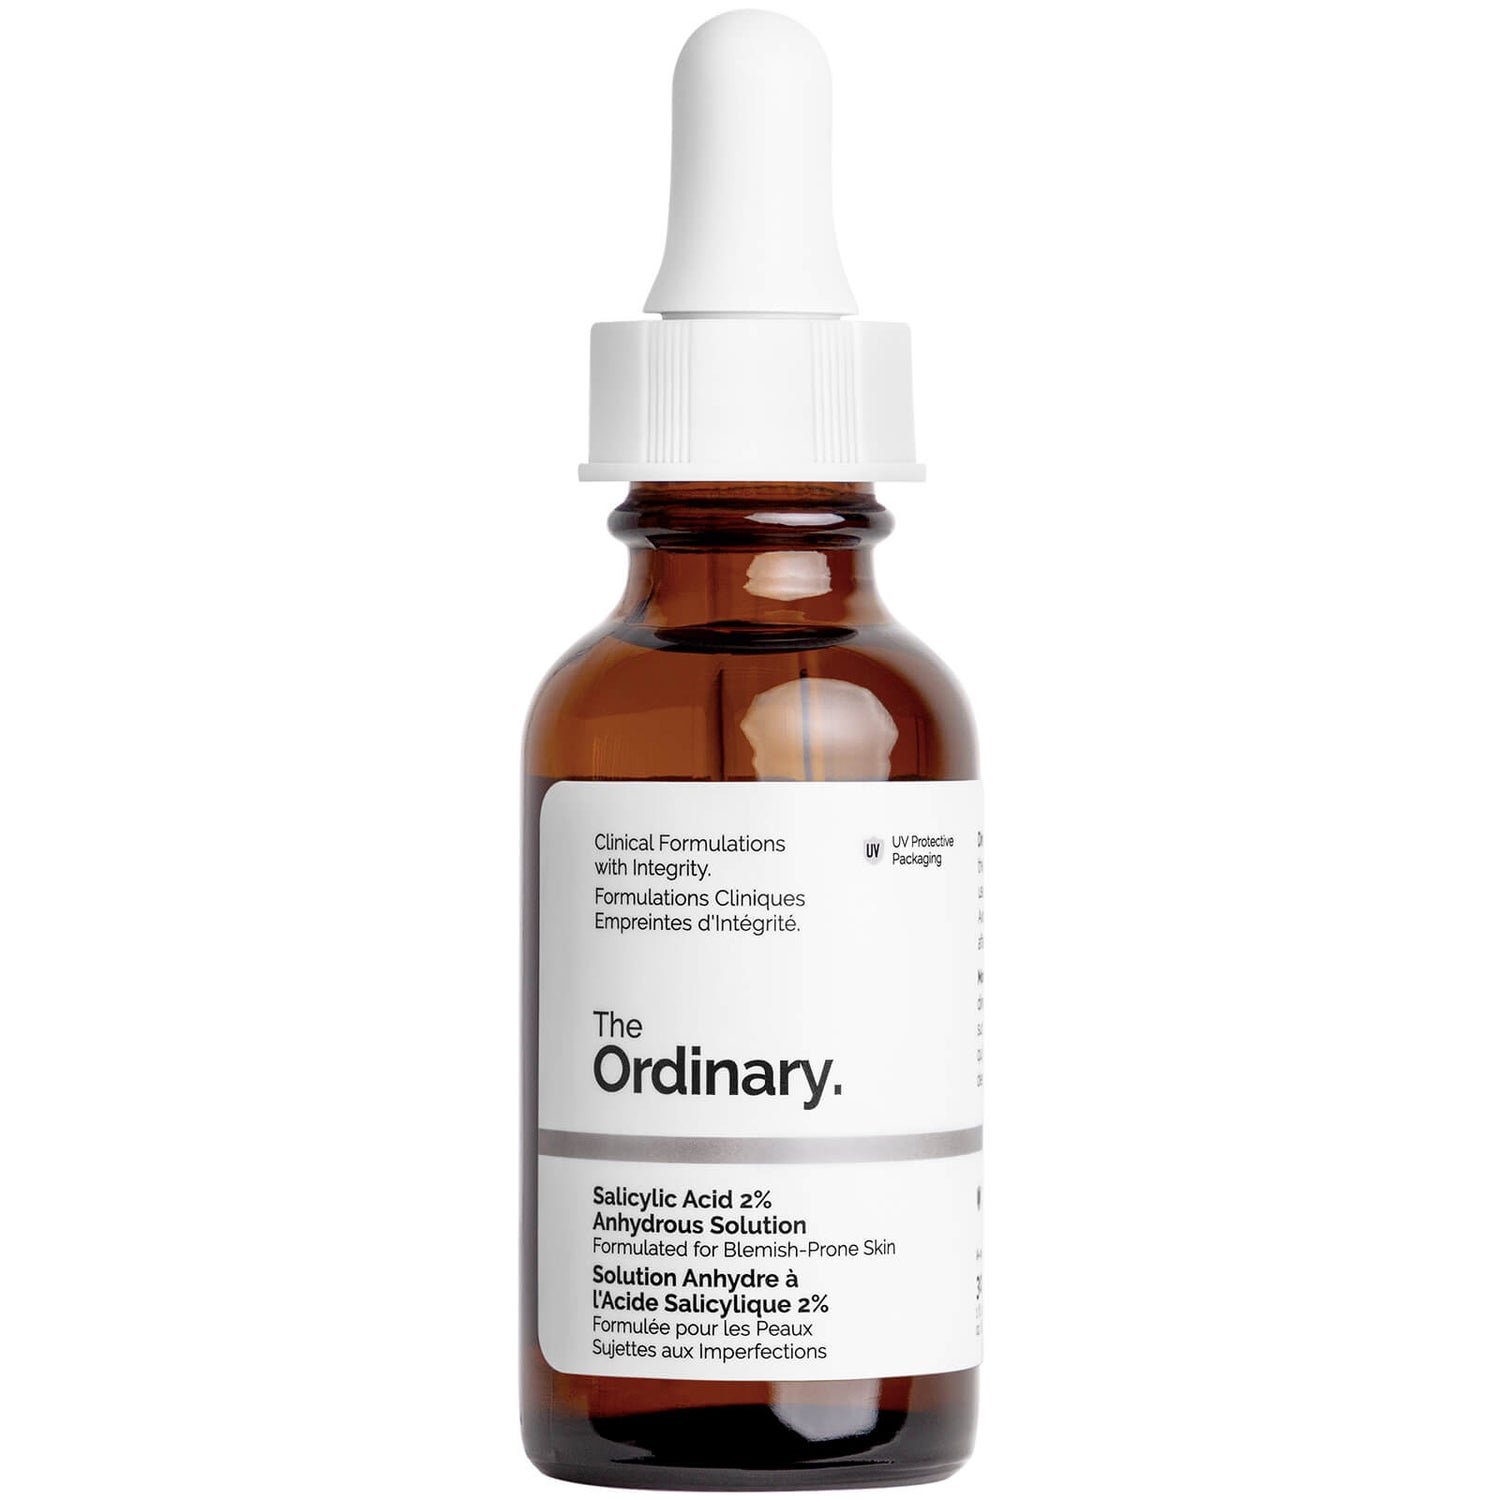 Solution anhydre 2 % d'acide salicylique The Ordinary 30 ml